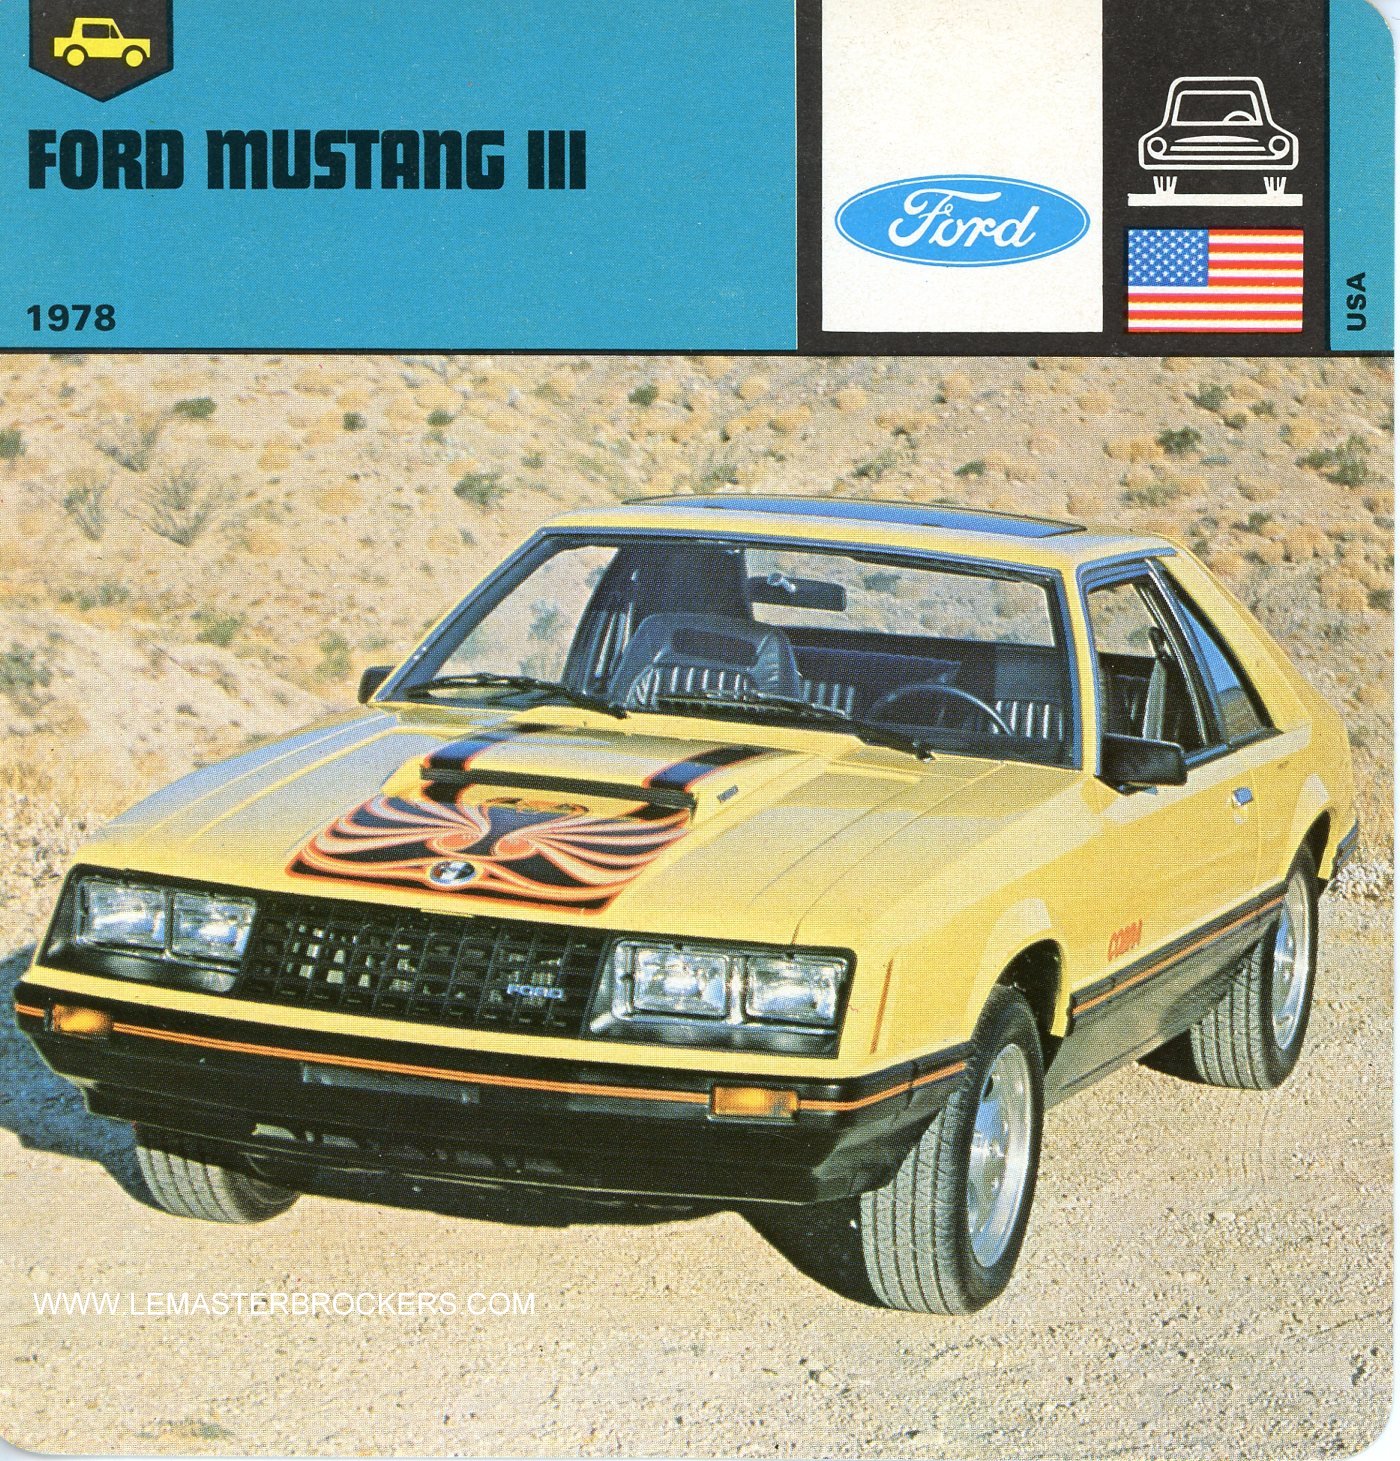 FICHE AUTO FORD MUSTANG III - 1978